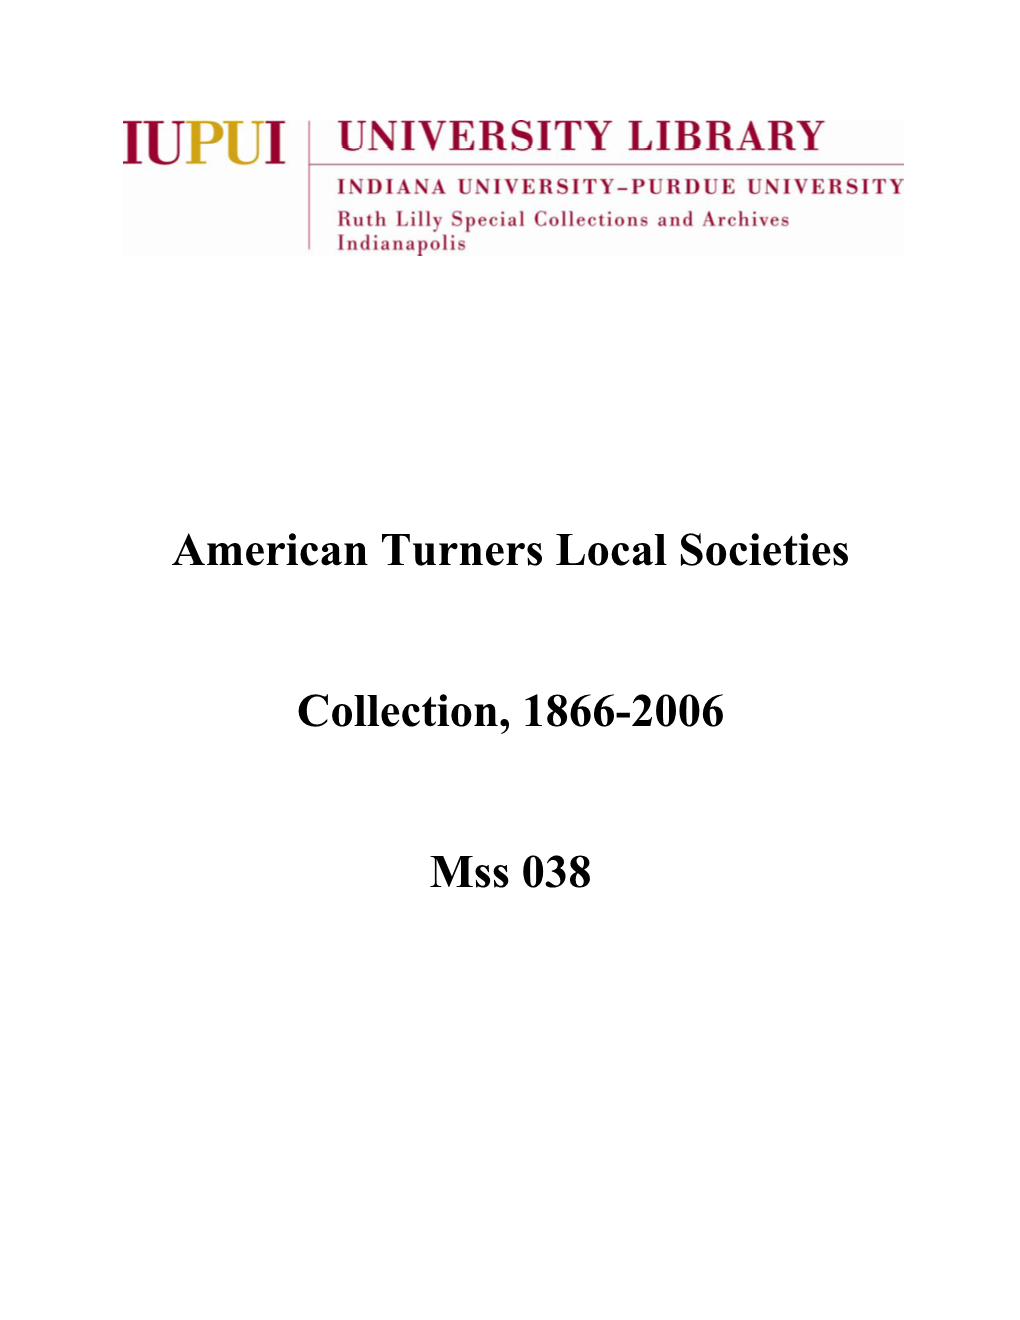 American Turners Local Societies Collection, 1866-2006 Mss 038 9.2 C.F (7 Cartons and 4 Flat Boxes)